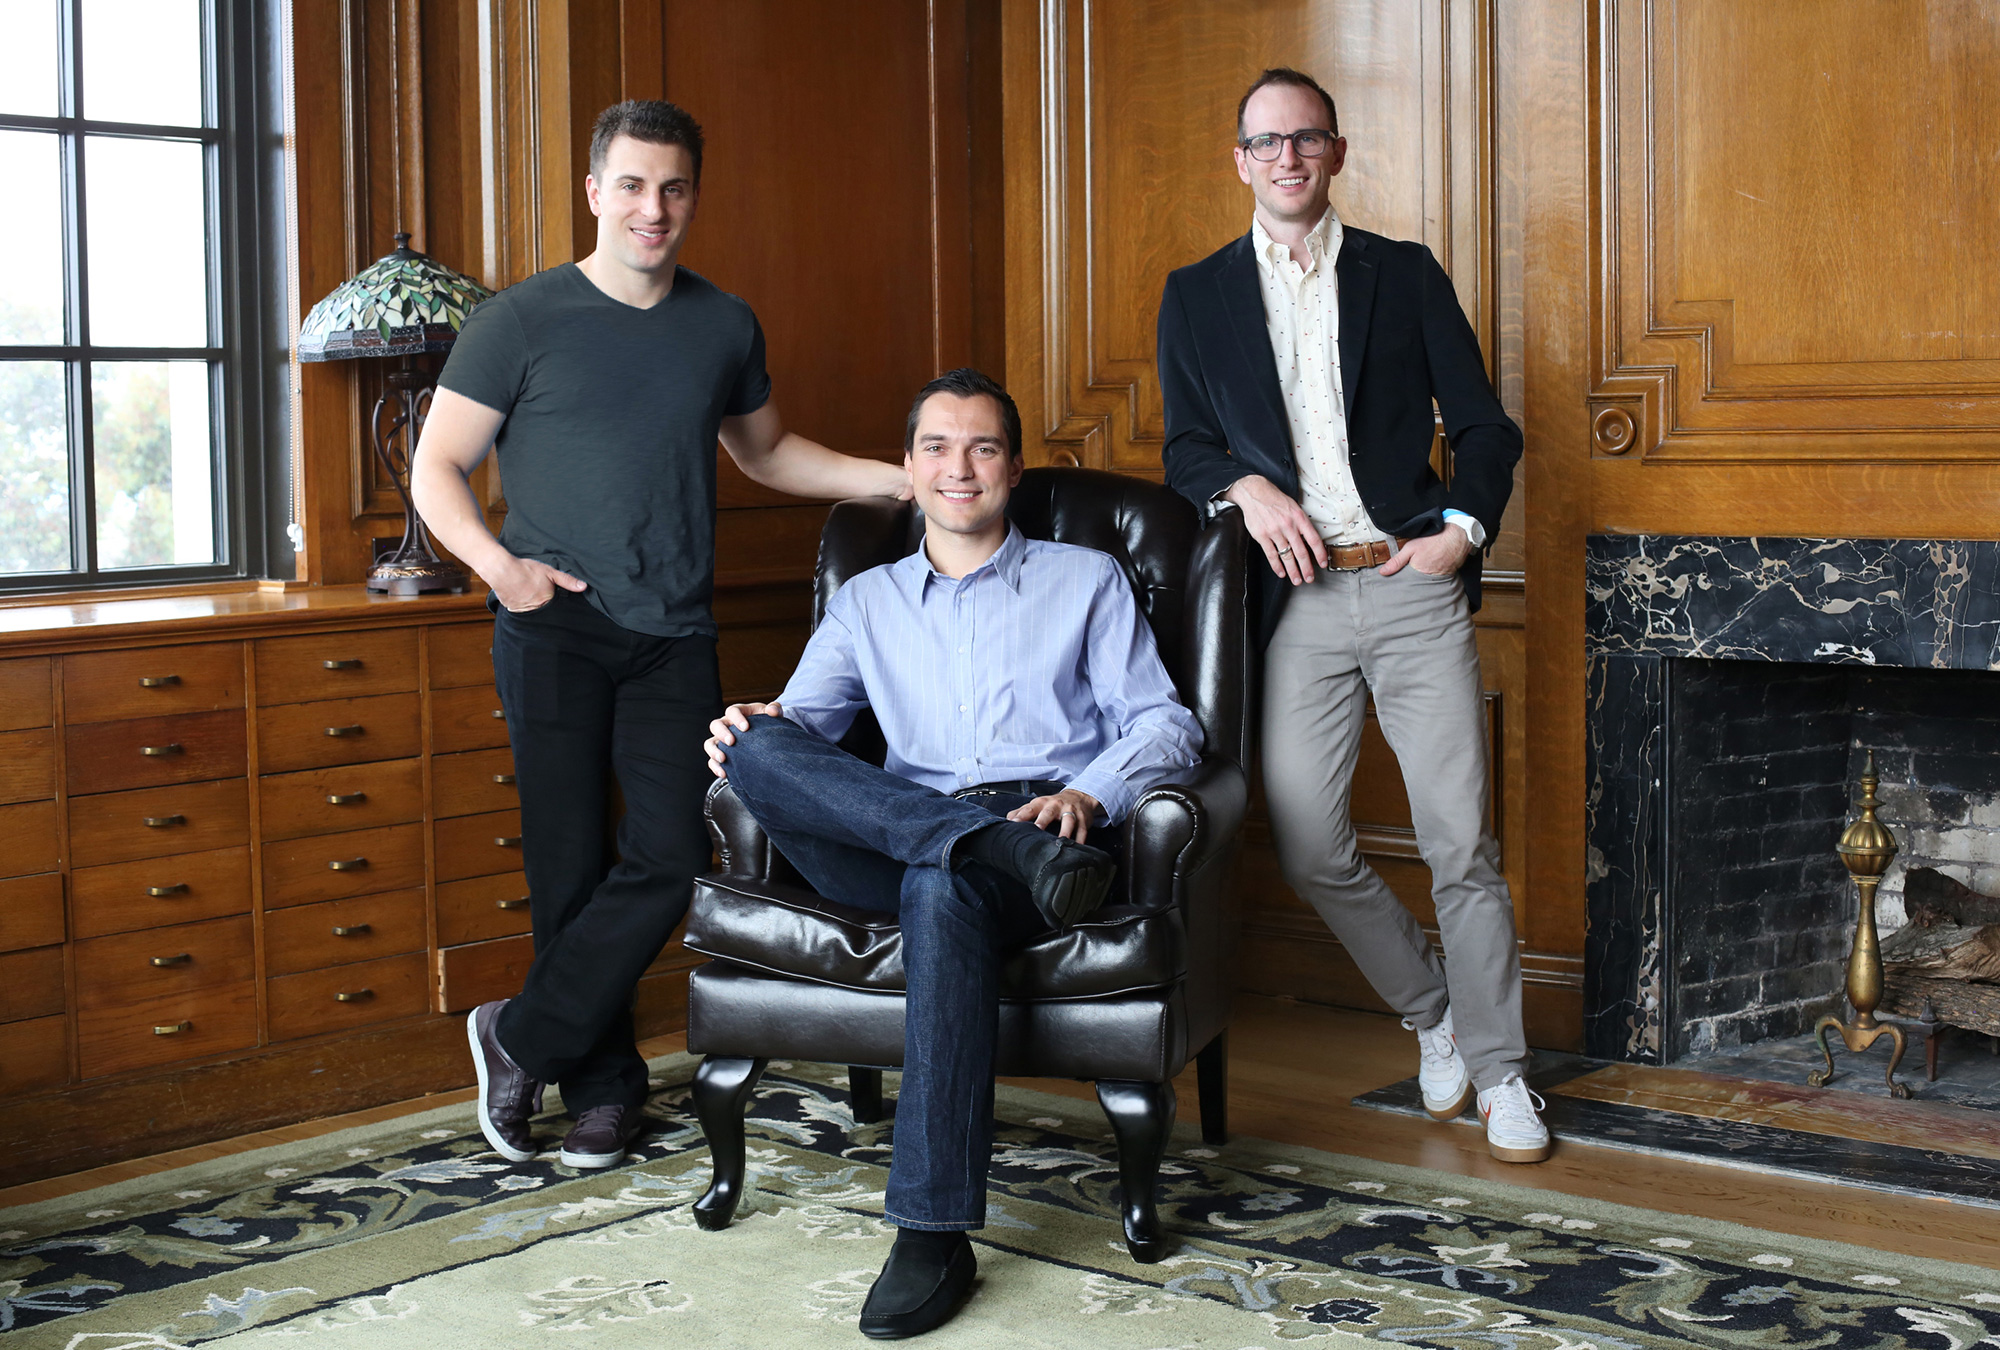 founders-airbnb-success-story.jpg